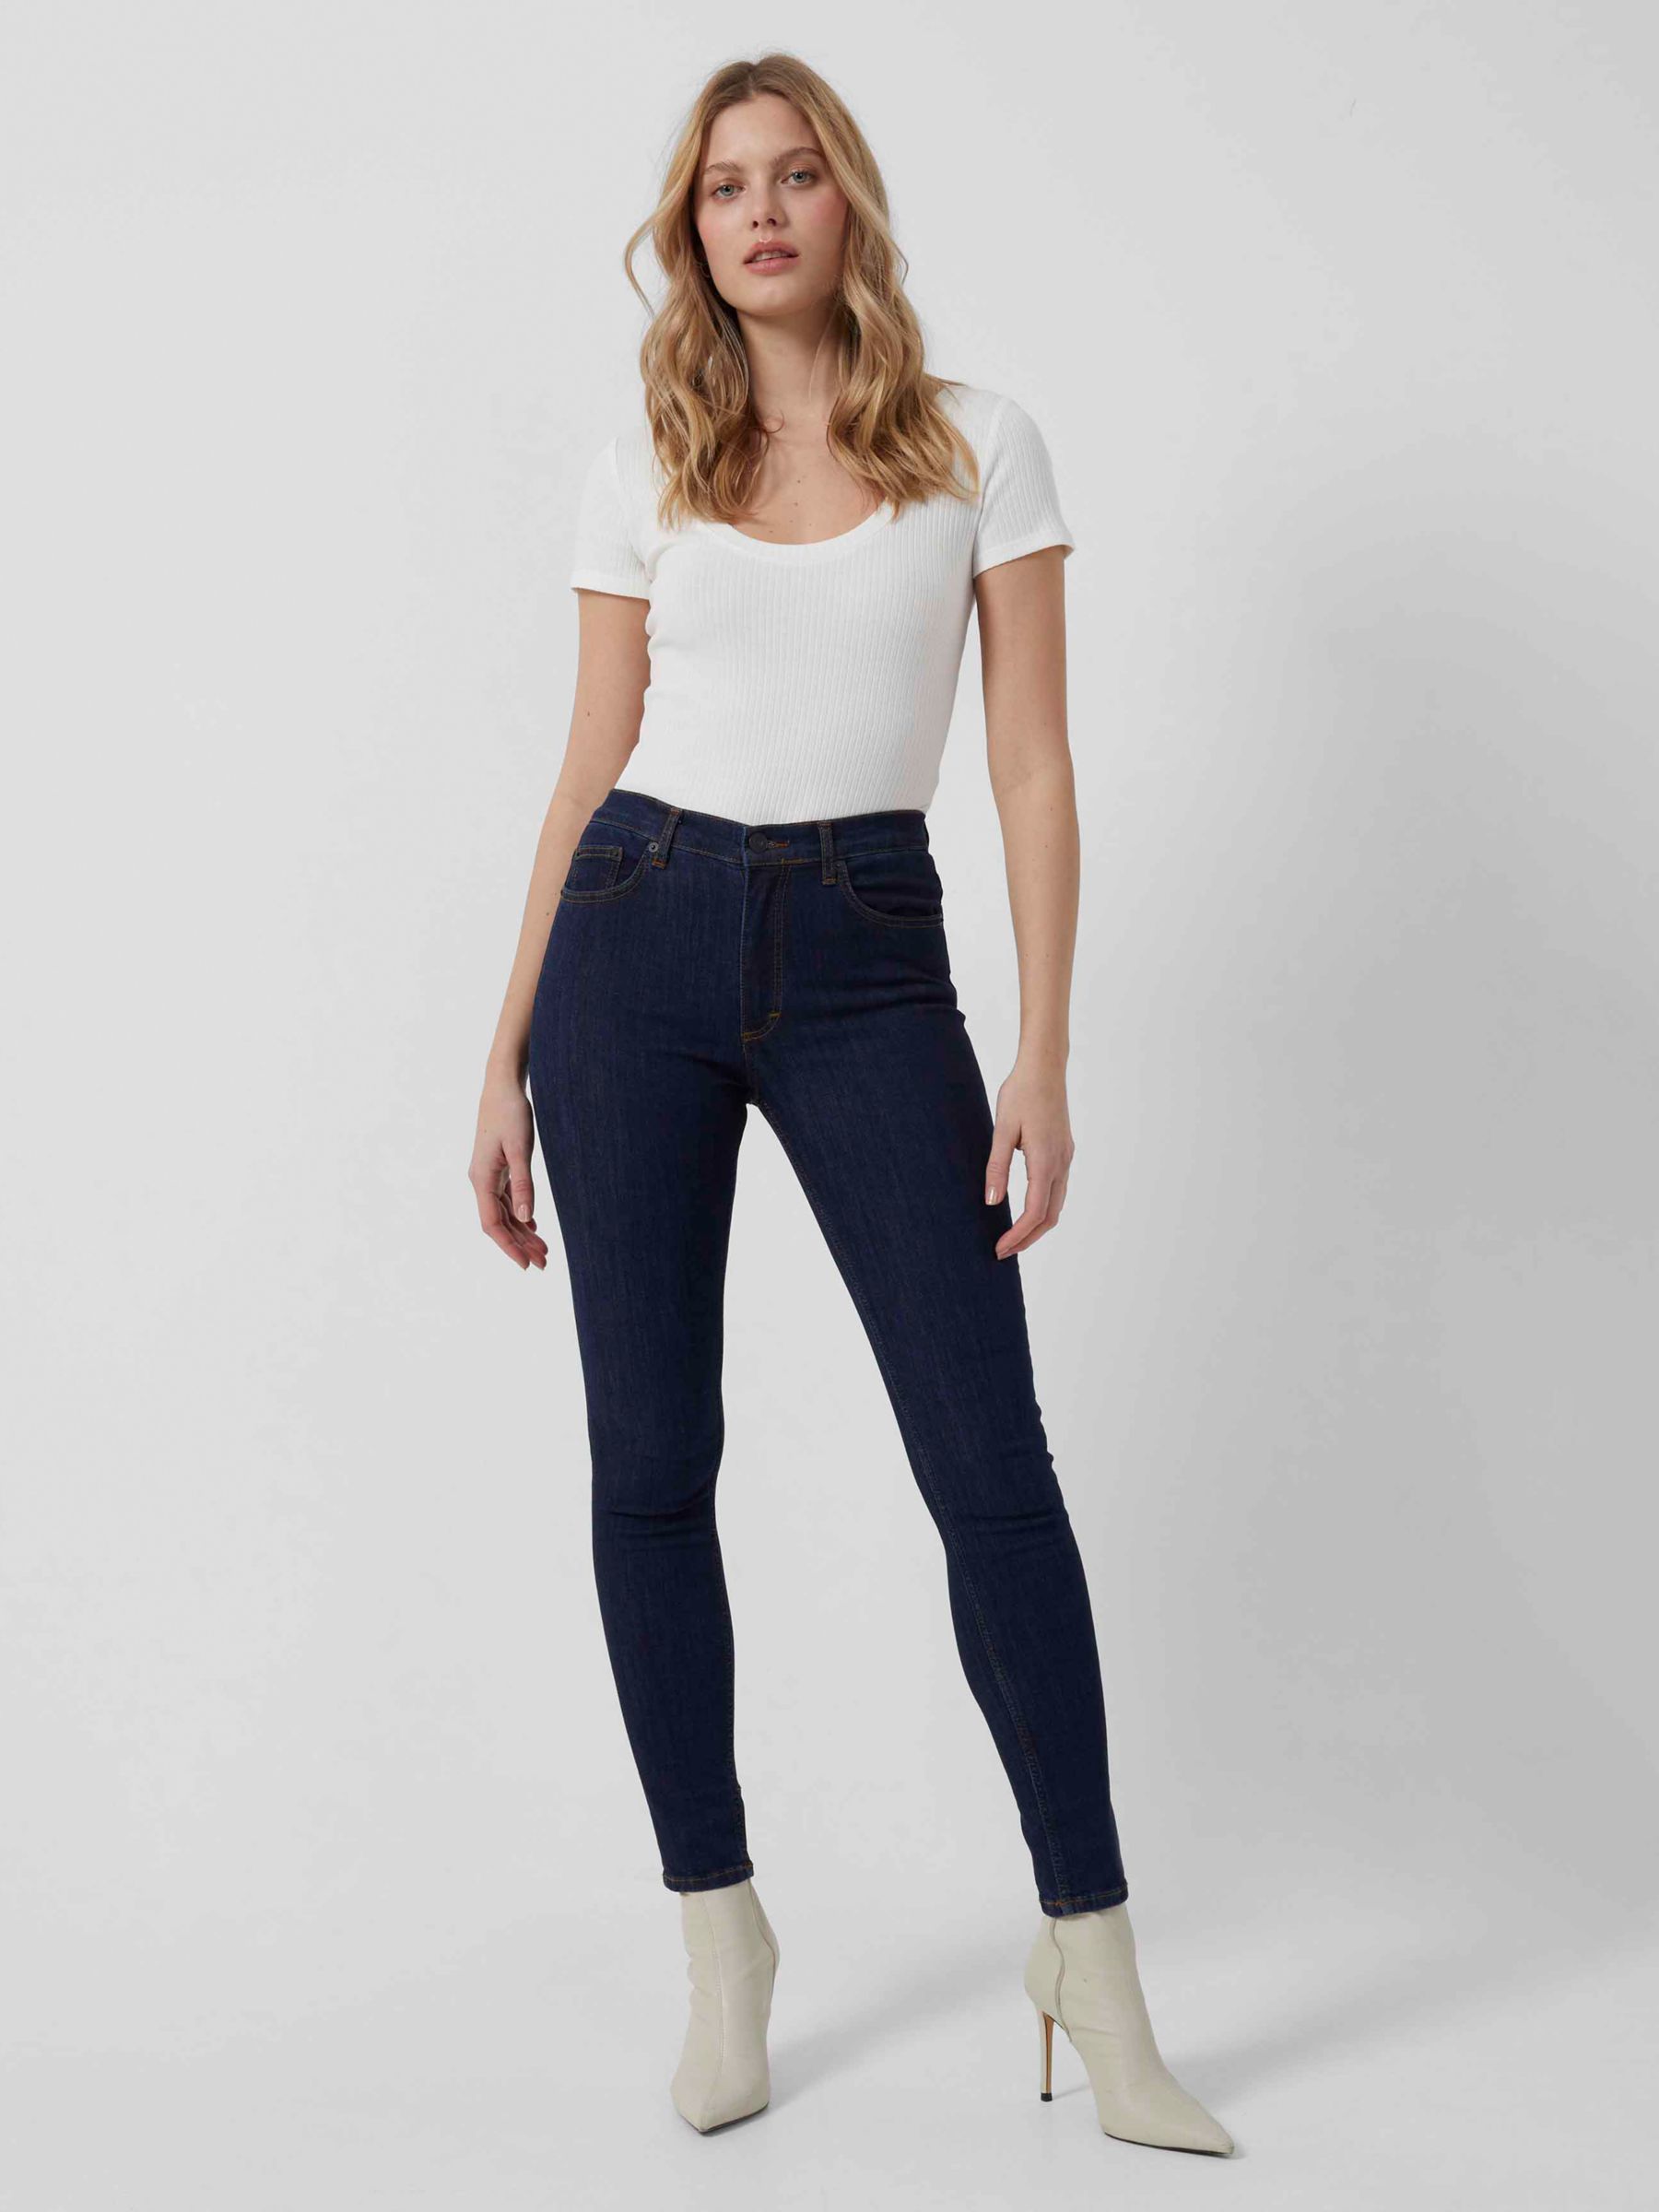 French Connection Skinny Jeans, Blue/Black at John Lewis & Partners